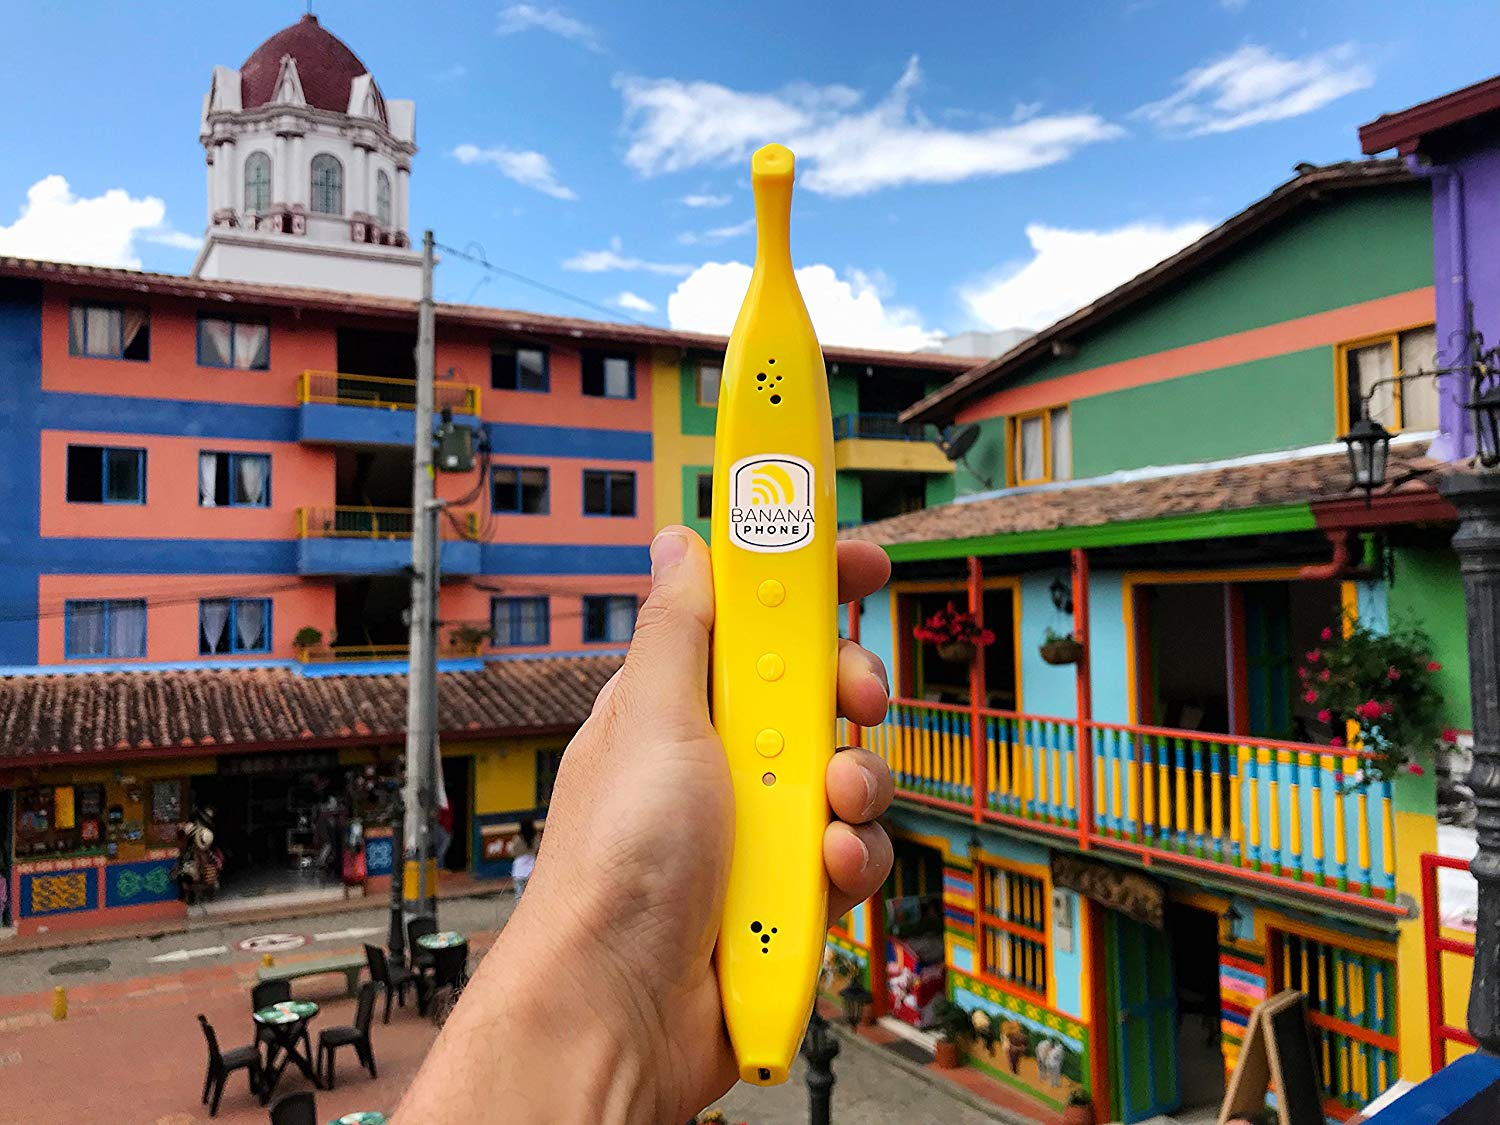 Ring Ring Ring Ring Ring Ring Ring... You know the drill.<br><br>Embrace the past and the future all at once with a portable banana phone available <a href="https://amzn.to/2QCIr8I" "nofollow" target="_blank">here</a>.